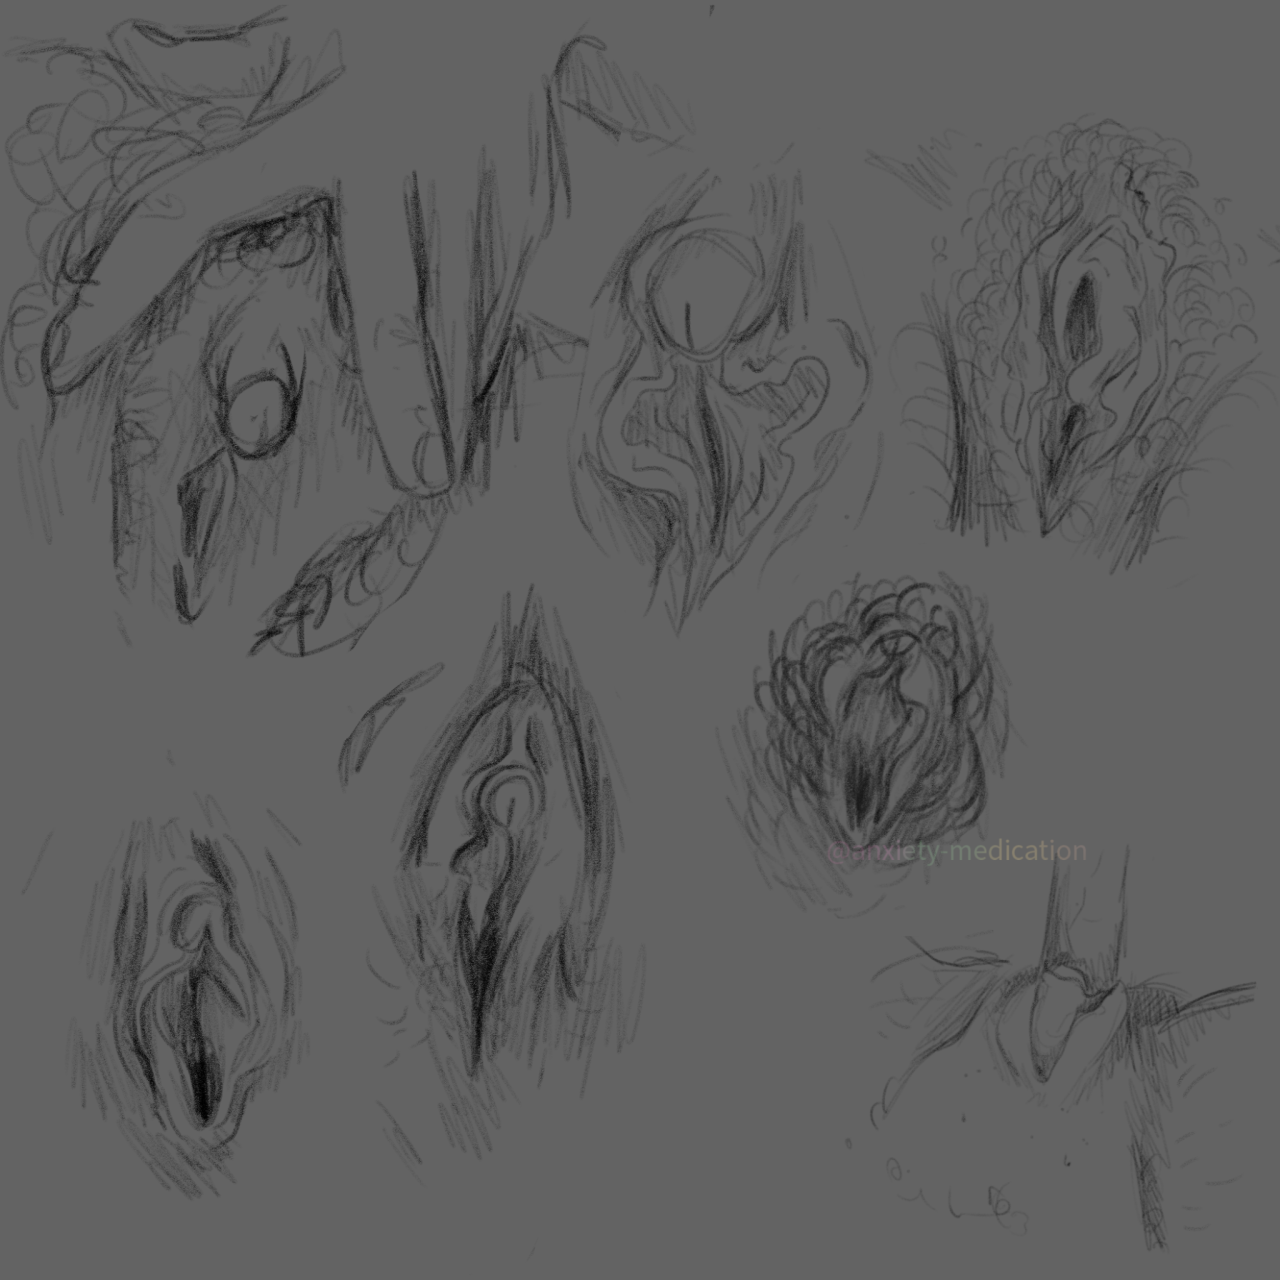 many sketches of trans vulvas on testosterone, some in different shapes and positions to show them off.